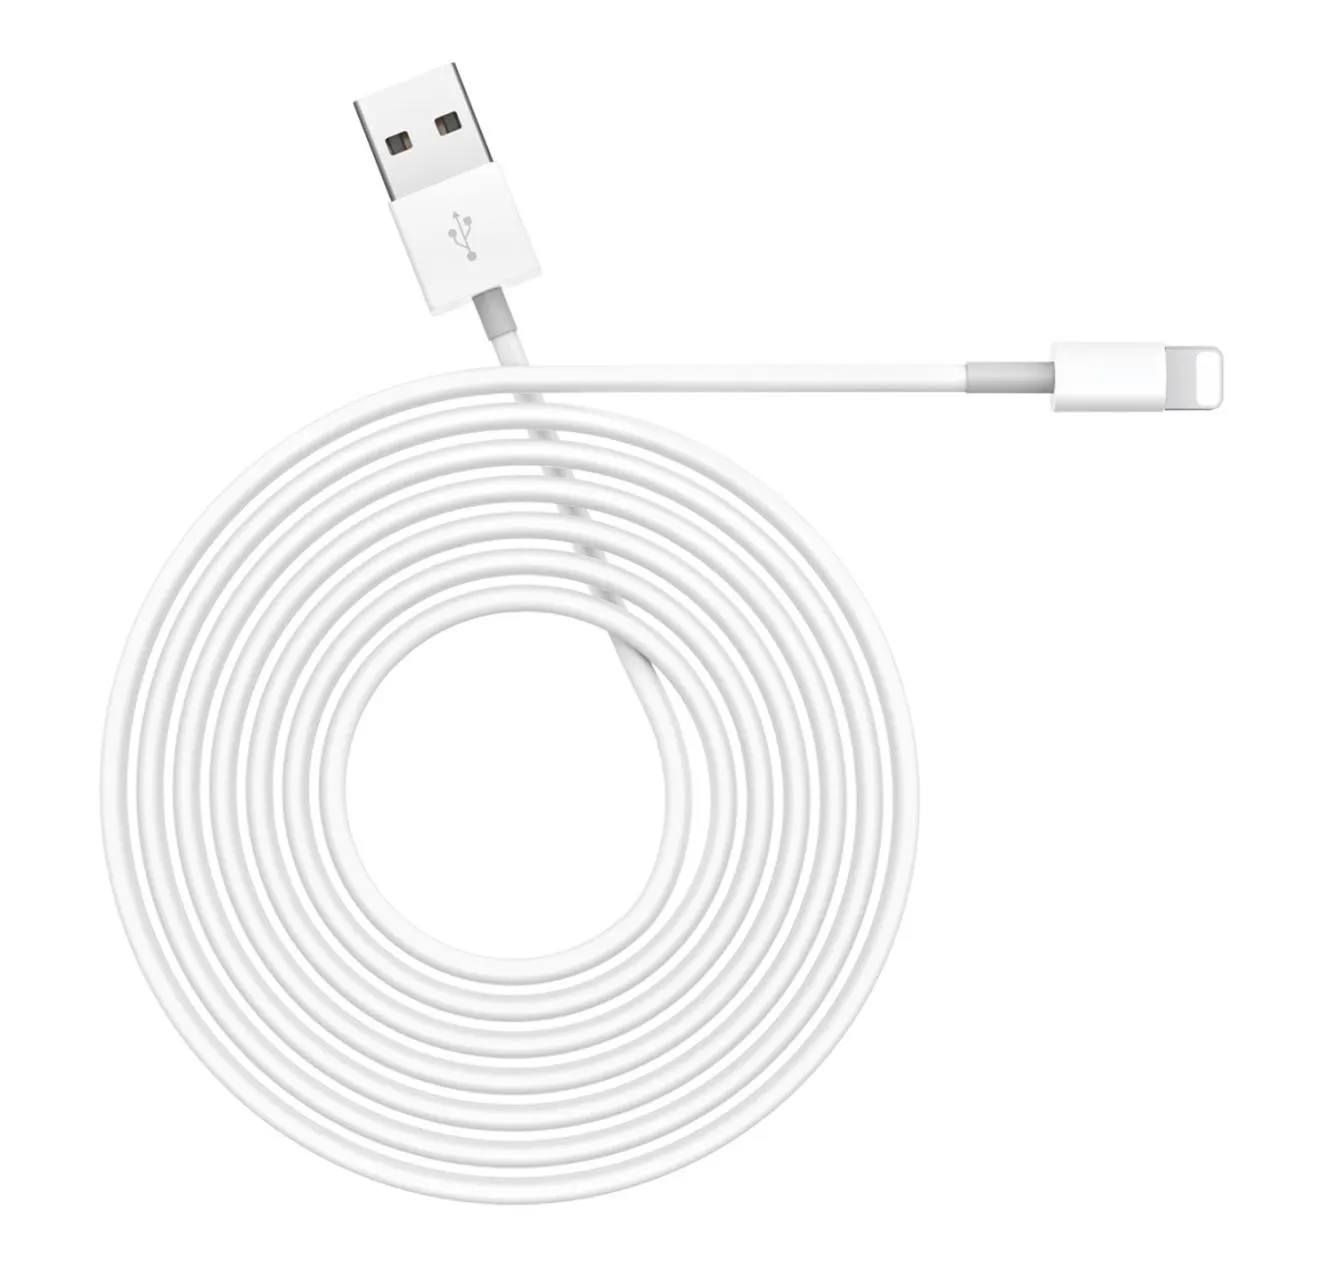 MFI Certified C89 Lightning to USB Cable With Aluminum alloy shell and Nylon Braided for Apple iPhone iPad iPad